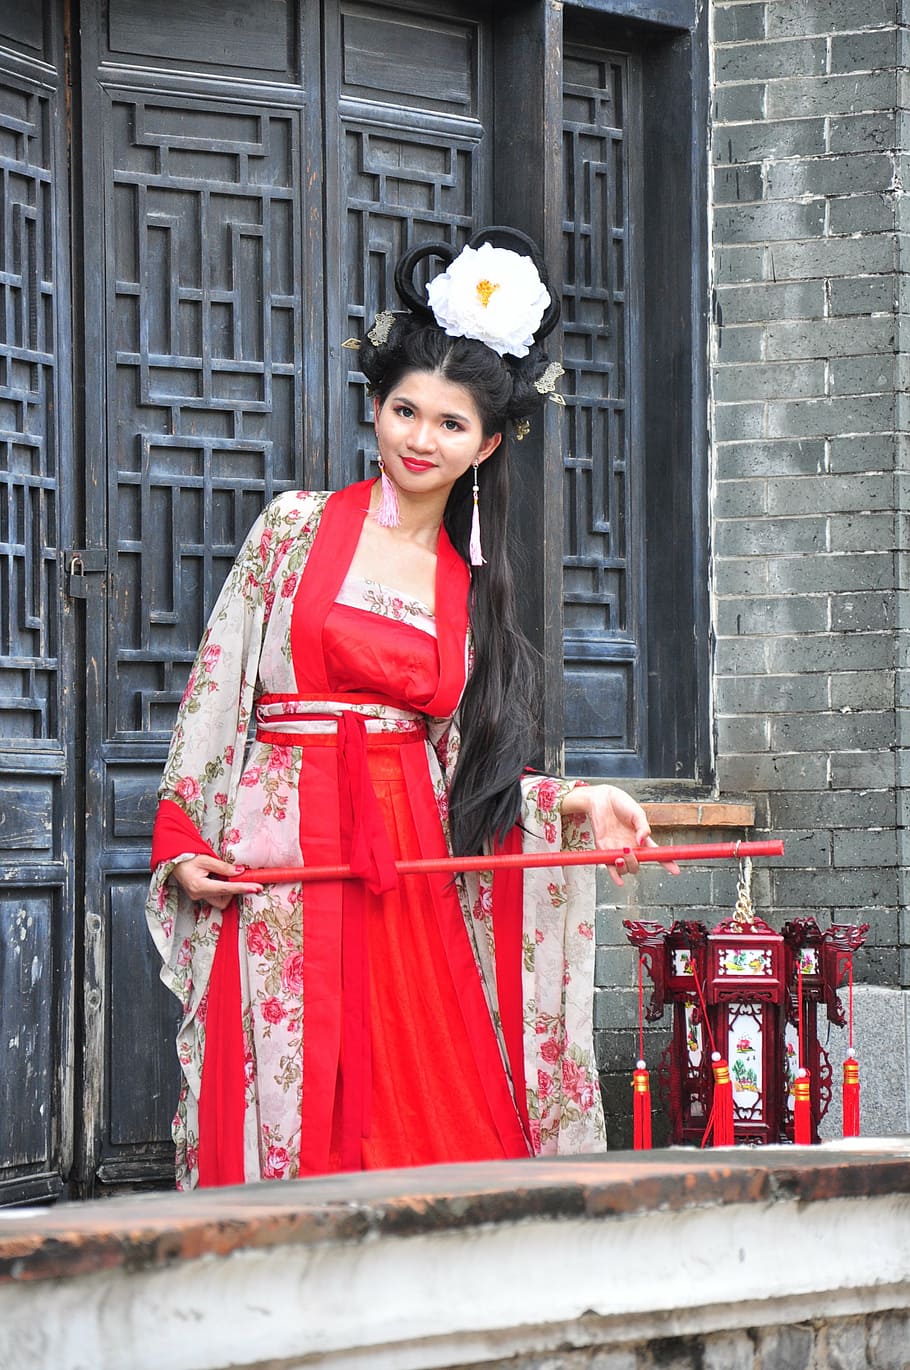 chinese woman, chinese woman with lantern, traditional chinese woman, one woman only, only women, adults only, red, adult, beautiful woman, one person